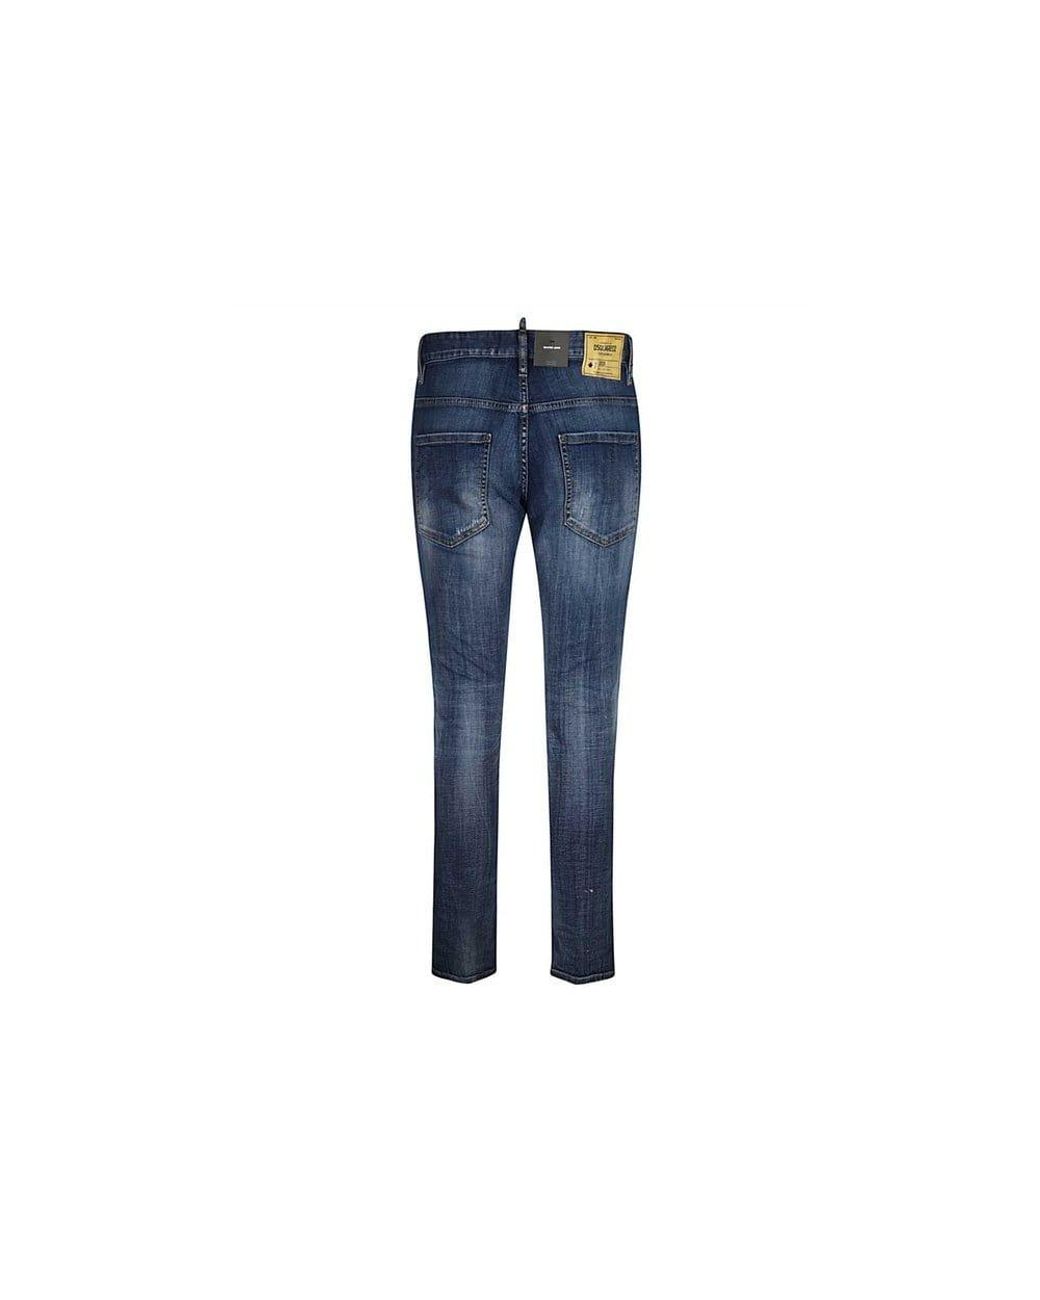 DSquared² Skater Jeans Caten Bros Patch Blue Jeans for Men | Lyst UK